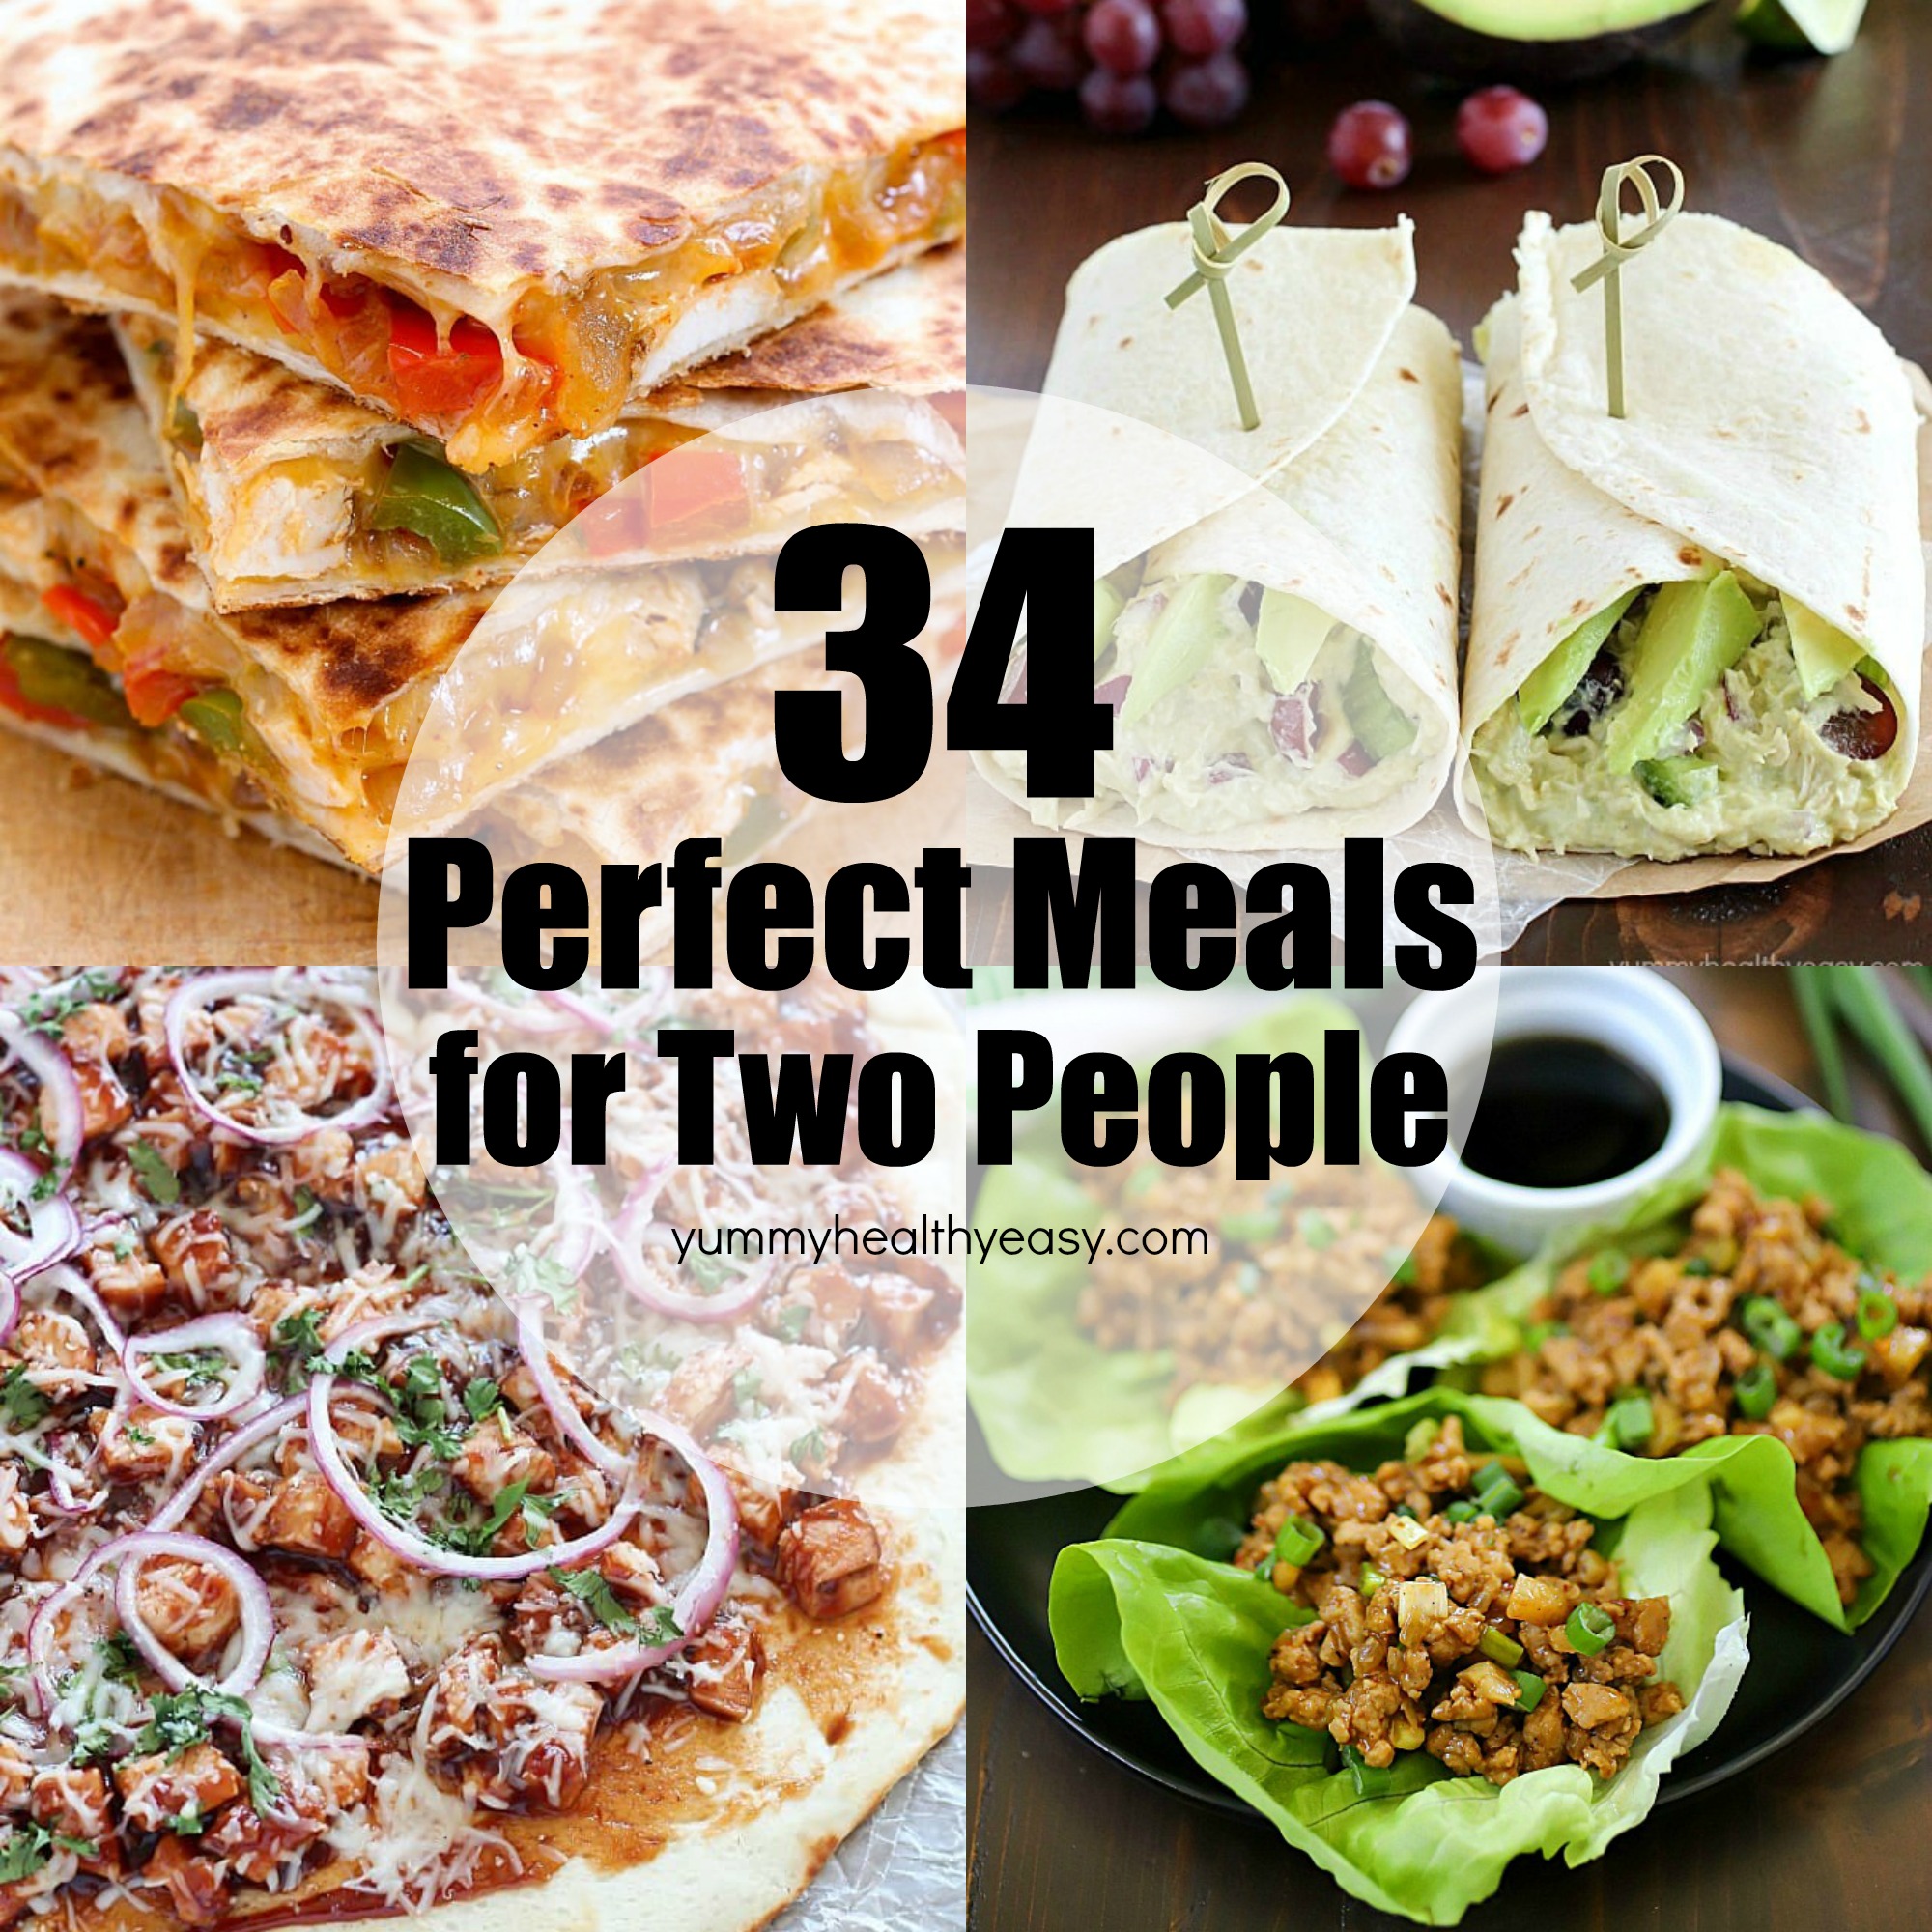 18 Easy Meal Recipes for Two People   Yummy Healthy Easy